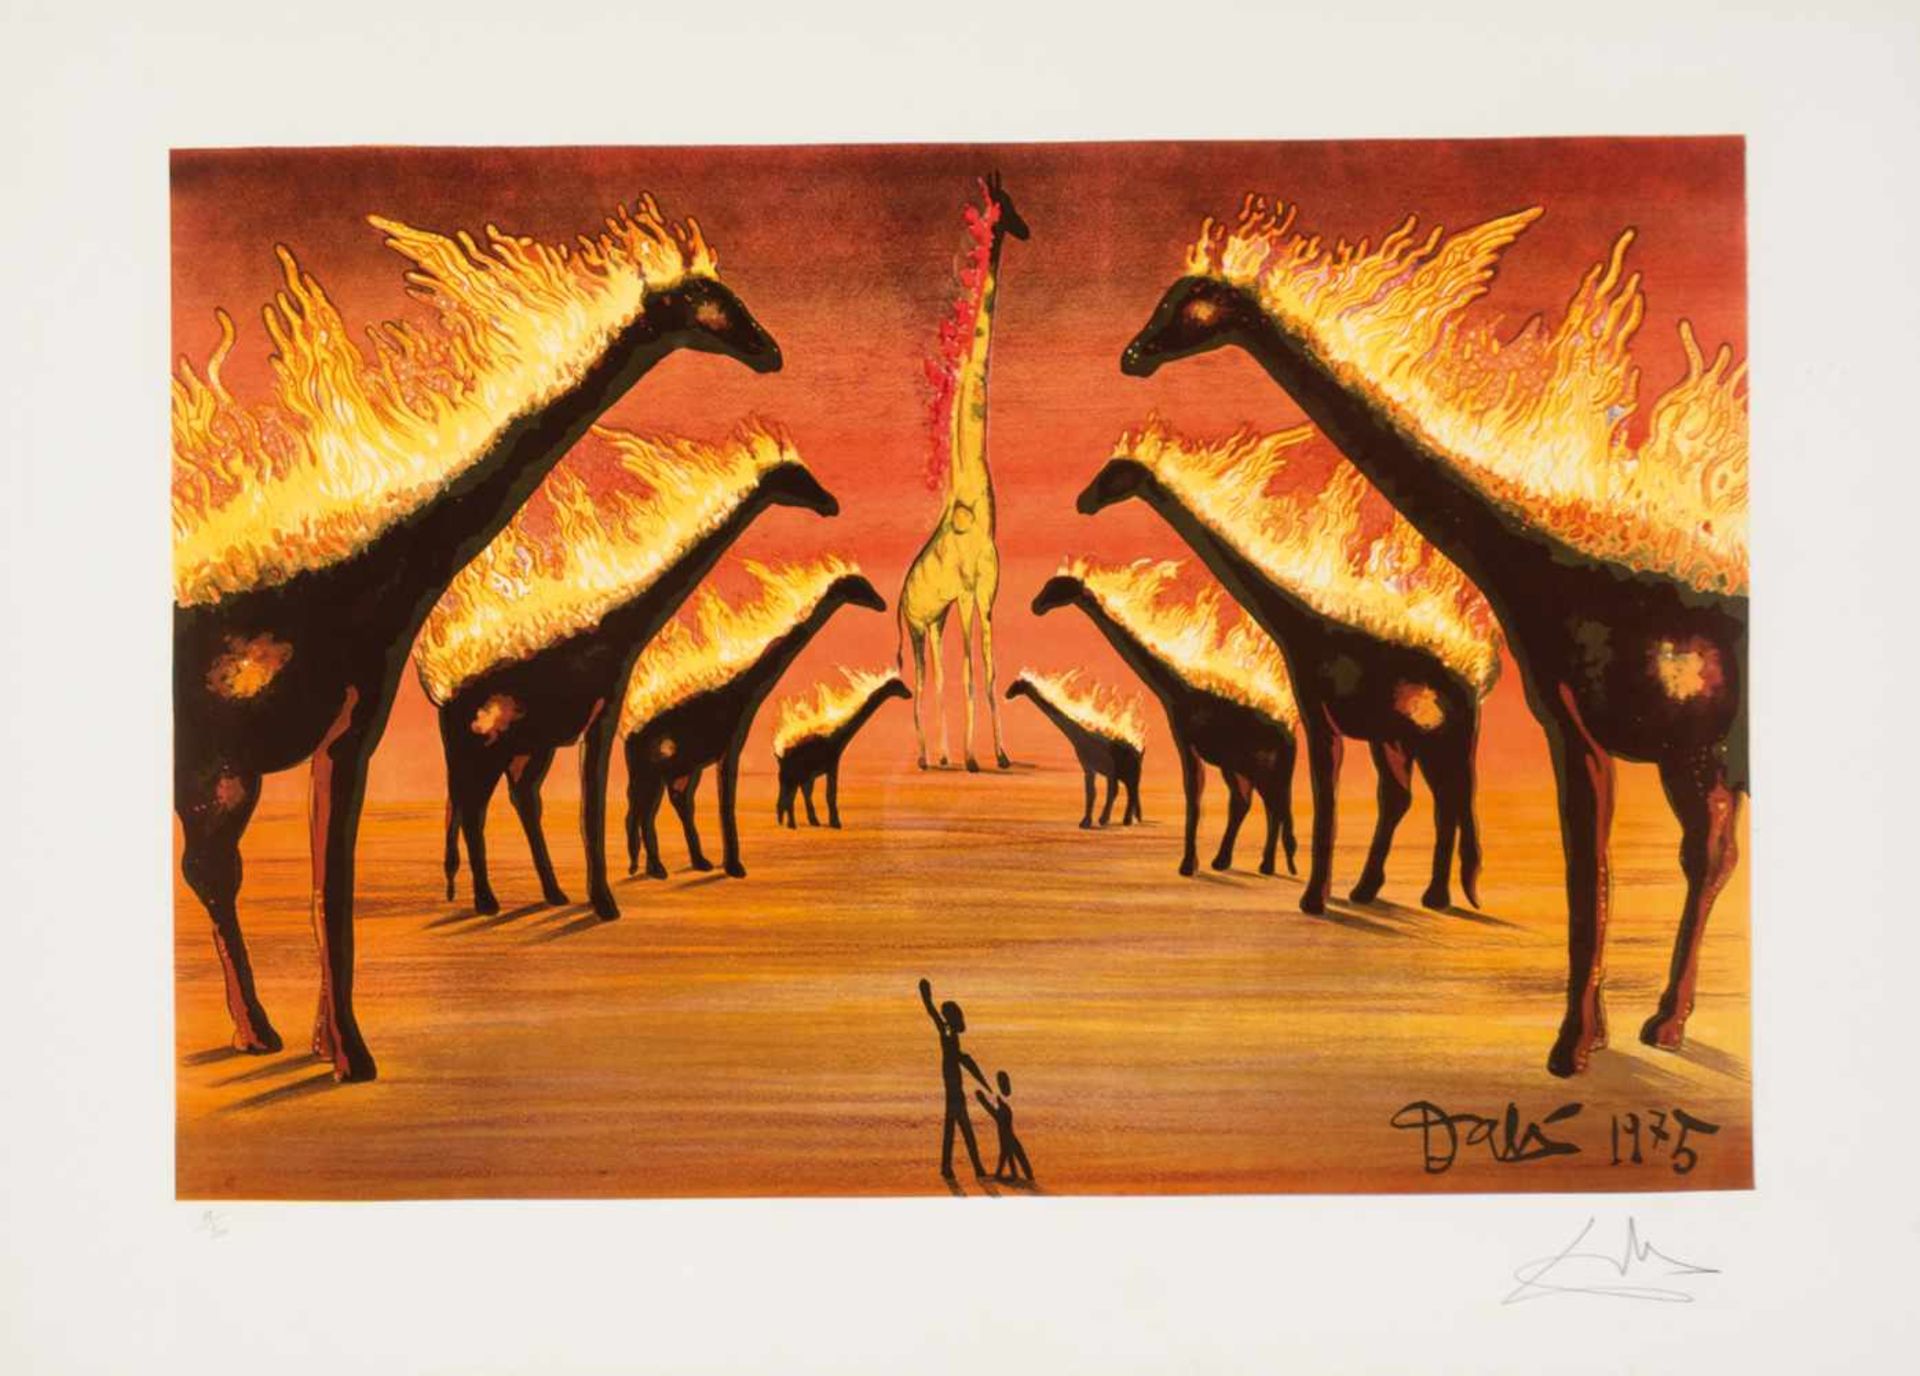 Salvador Dalí (Figueres, 1904 - 1989) Lithograph. Signed in pencil and numbered 19/300. 54,5 x 75